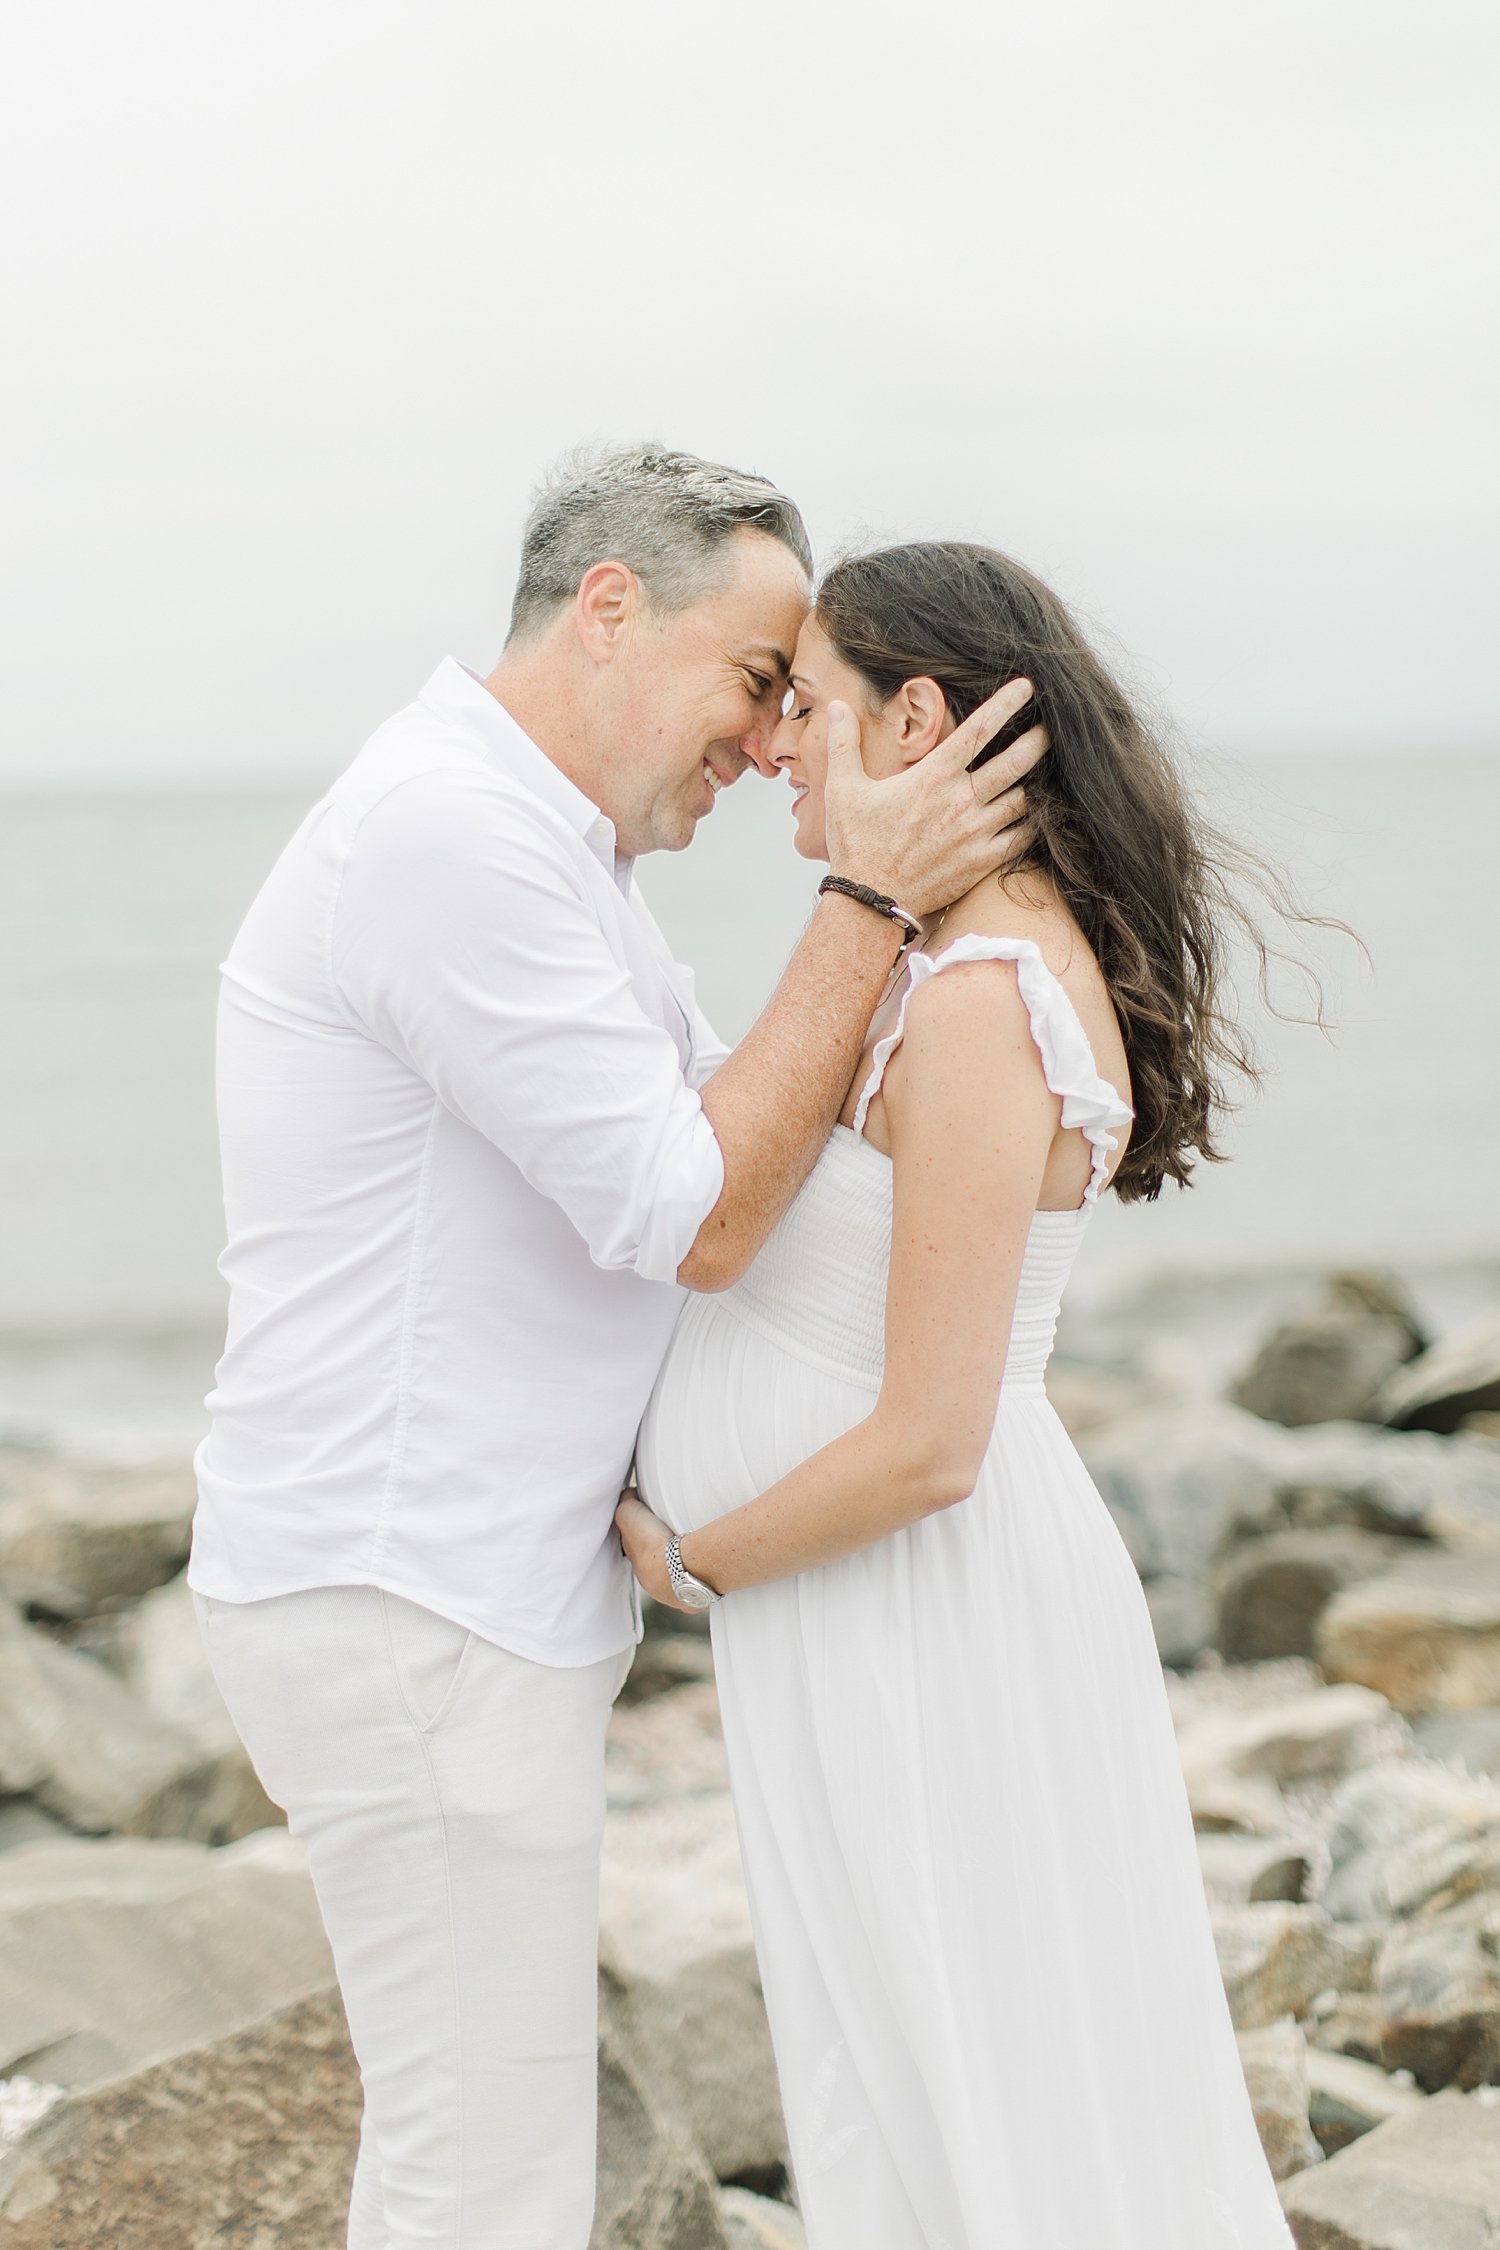 Expecting parents sharing a special moment at Sherwood Island during maternity session with Kristin Wood Photography.